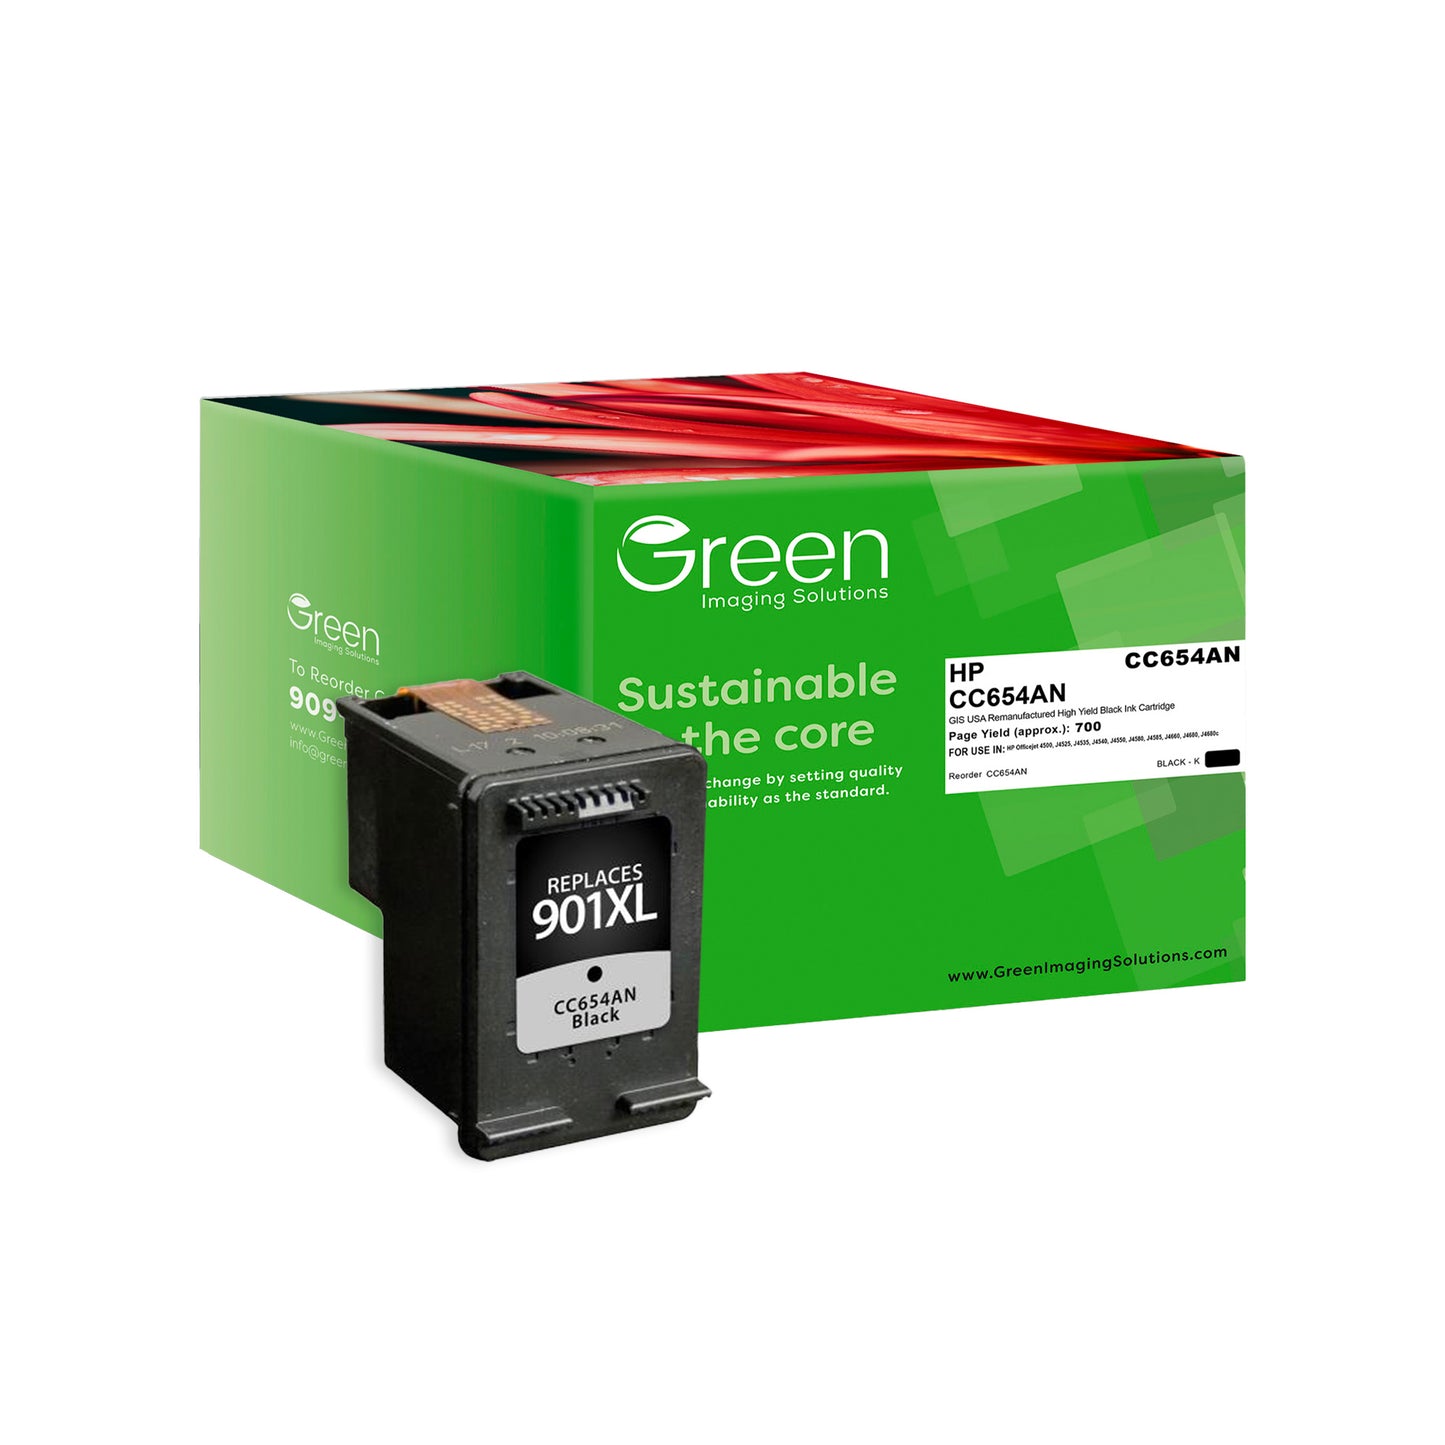 Green Imaging Solutions USA Remanufactured High Yield Black Ink Cartridge for HP 901XL (CC654AN)